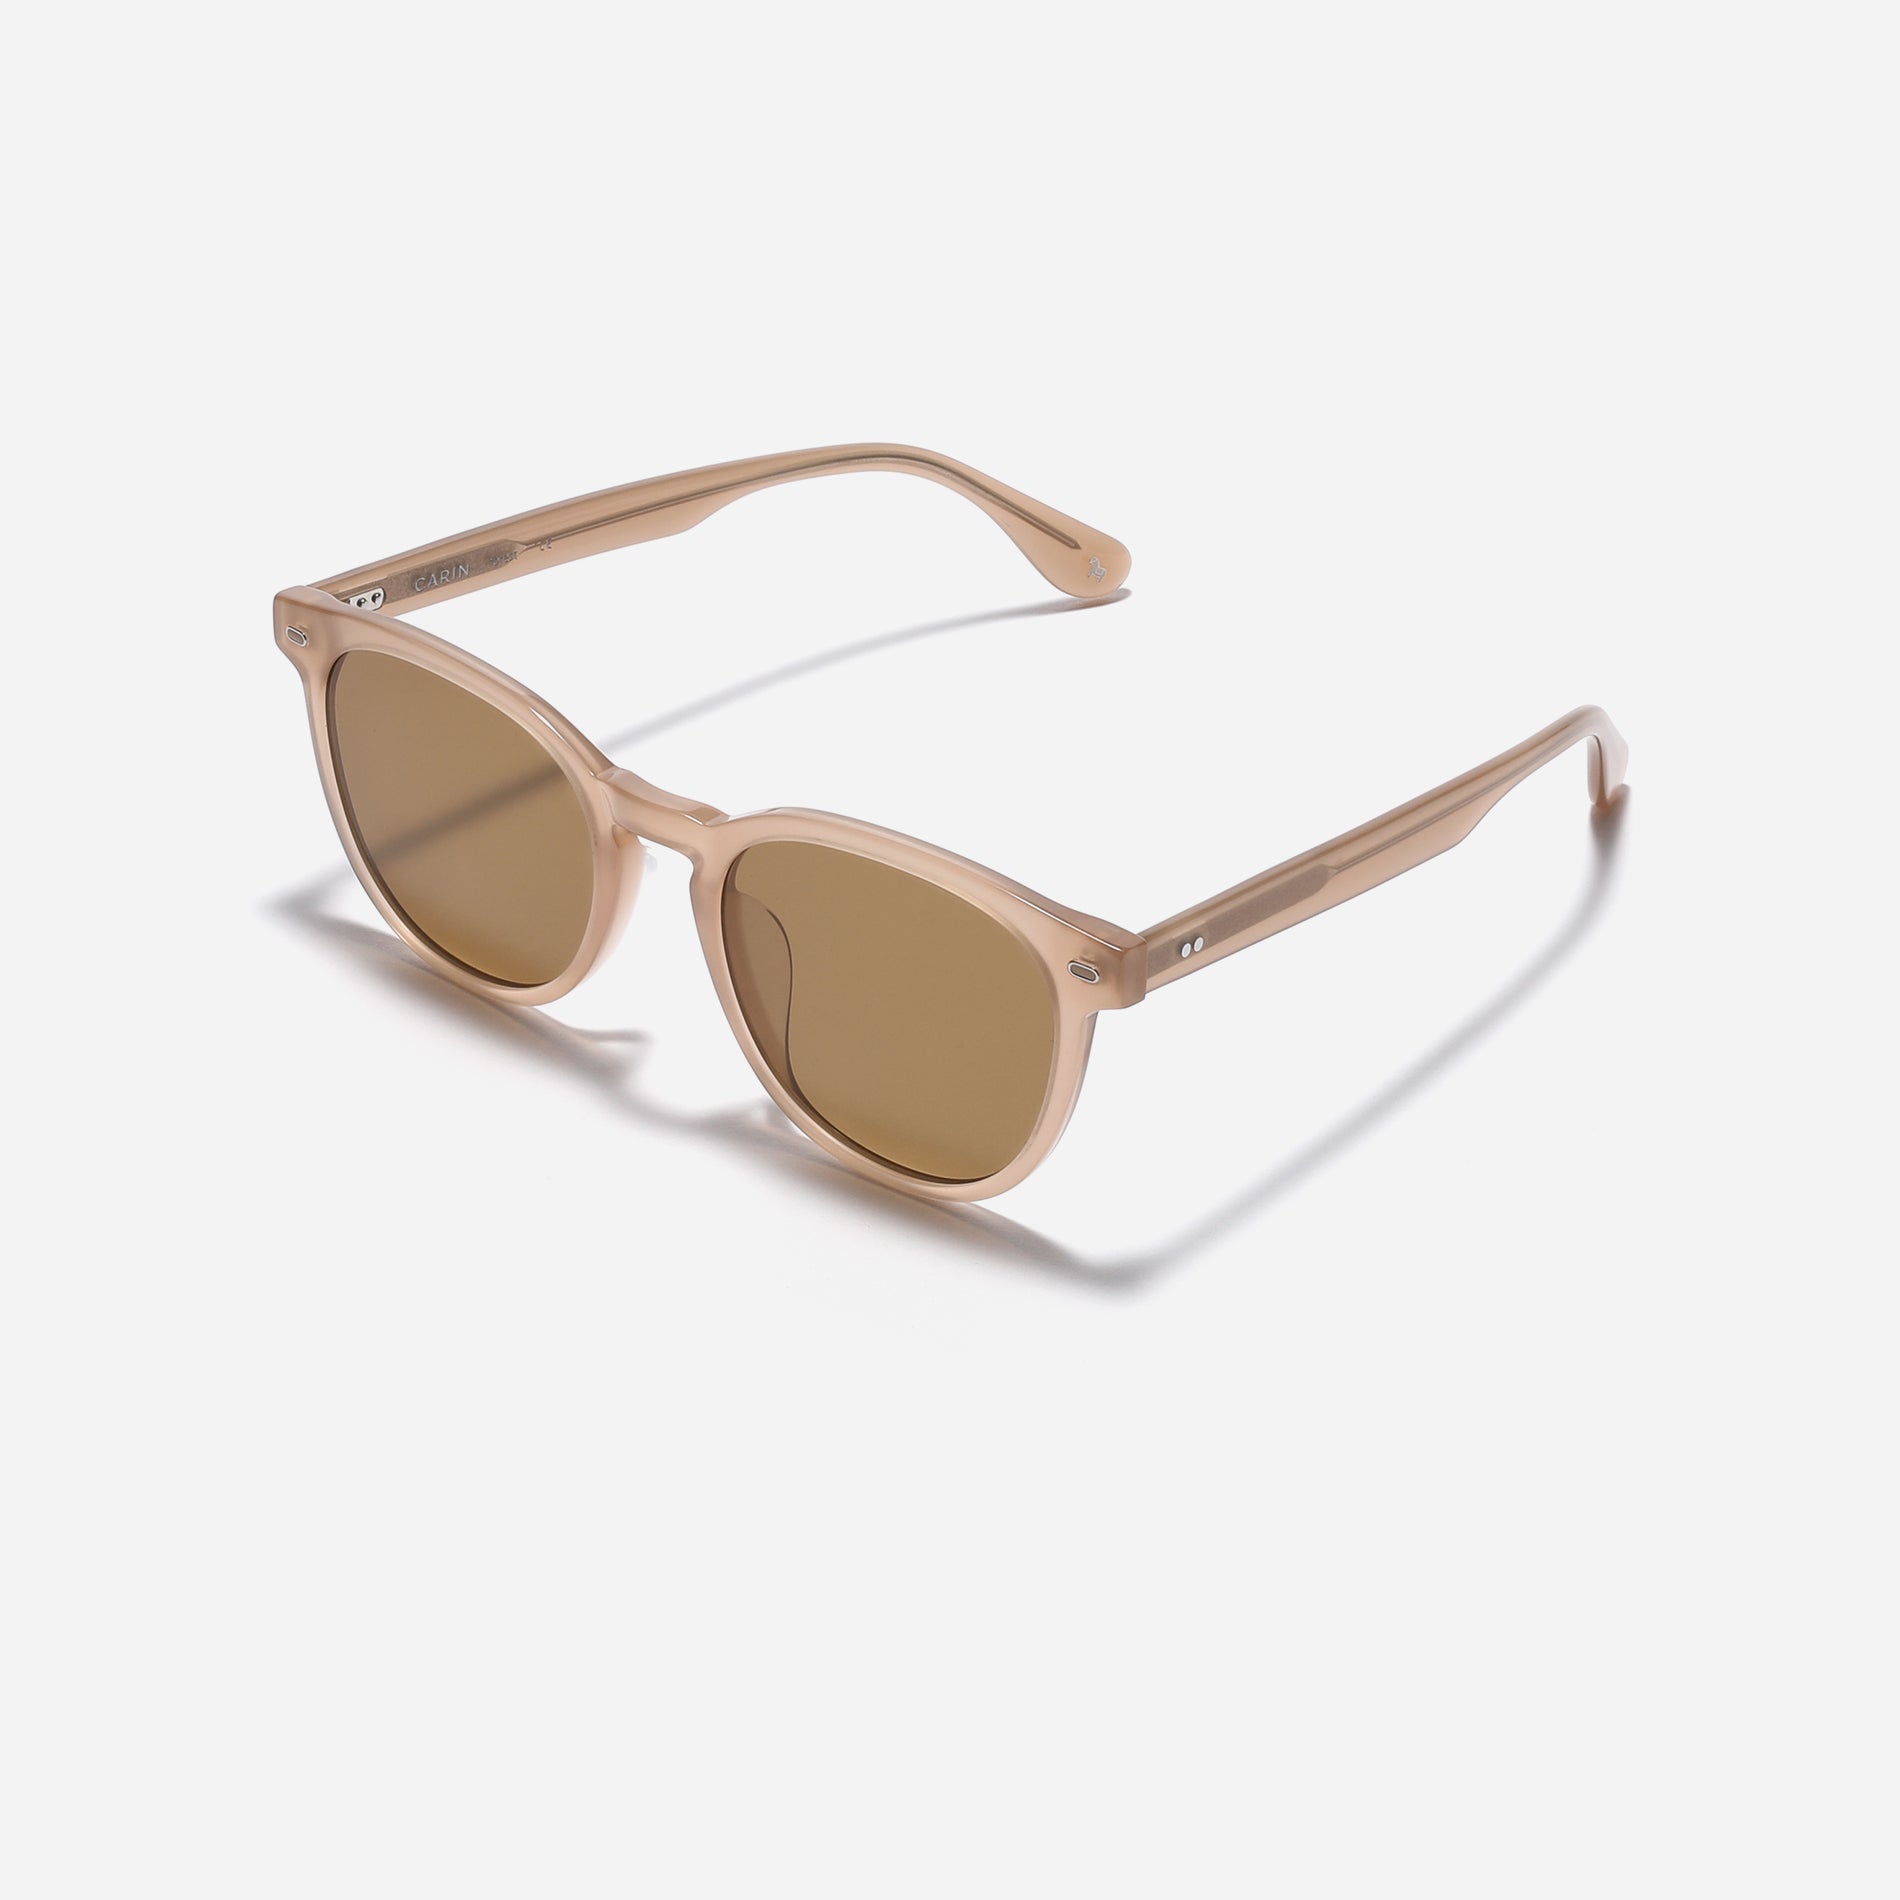 Round-shaped sunglasses from the Forest Line. With their soft form and stylish square frame, Connie offer a versatile and fashionable option for everyday wear, especially appealing to those new to sunglasses.